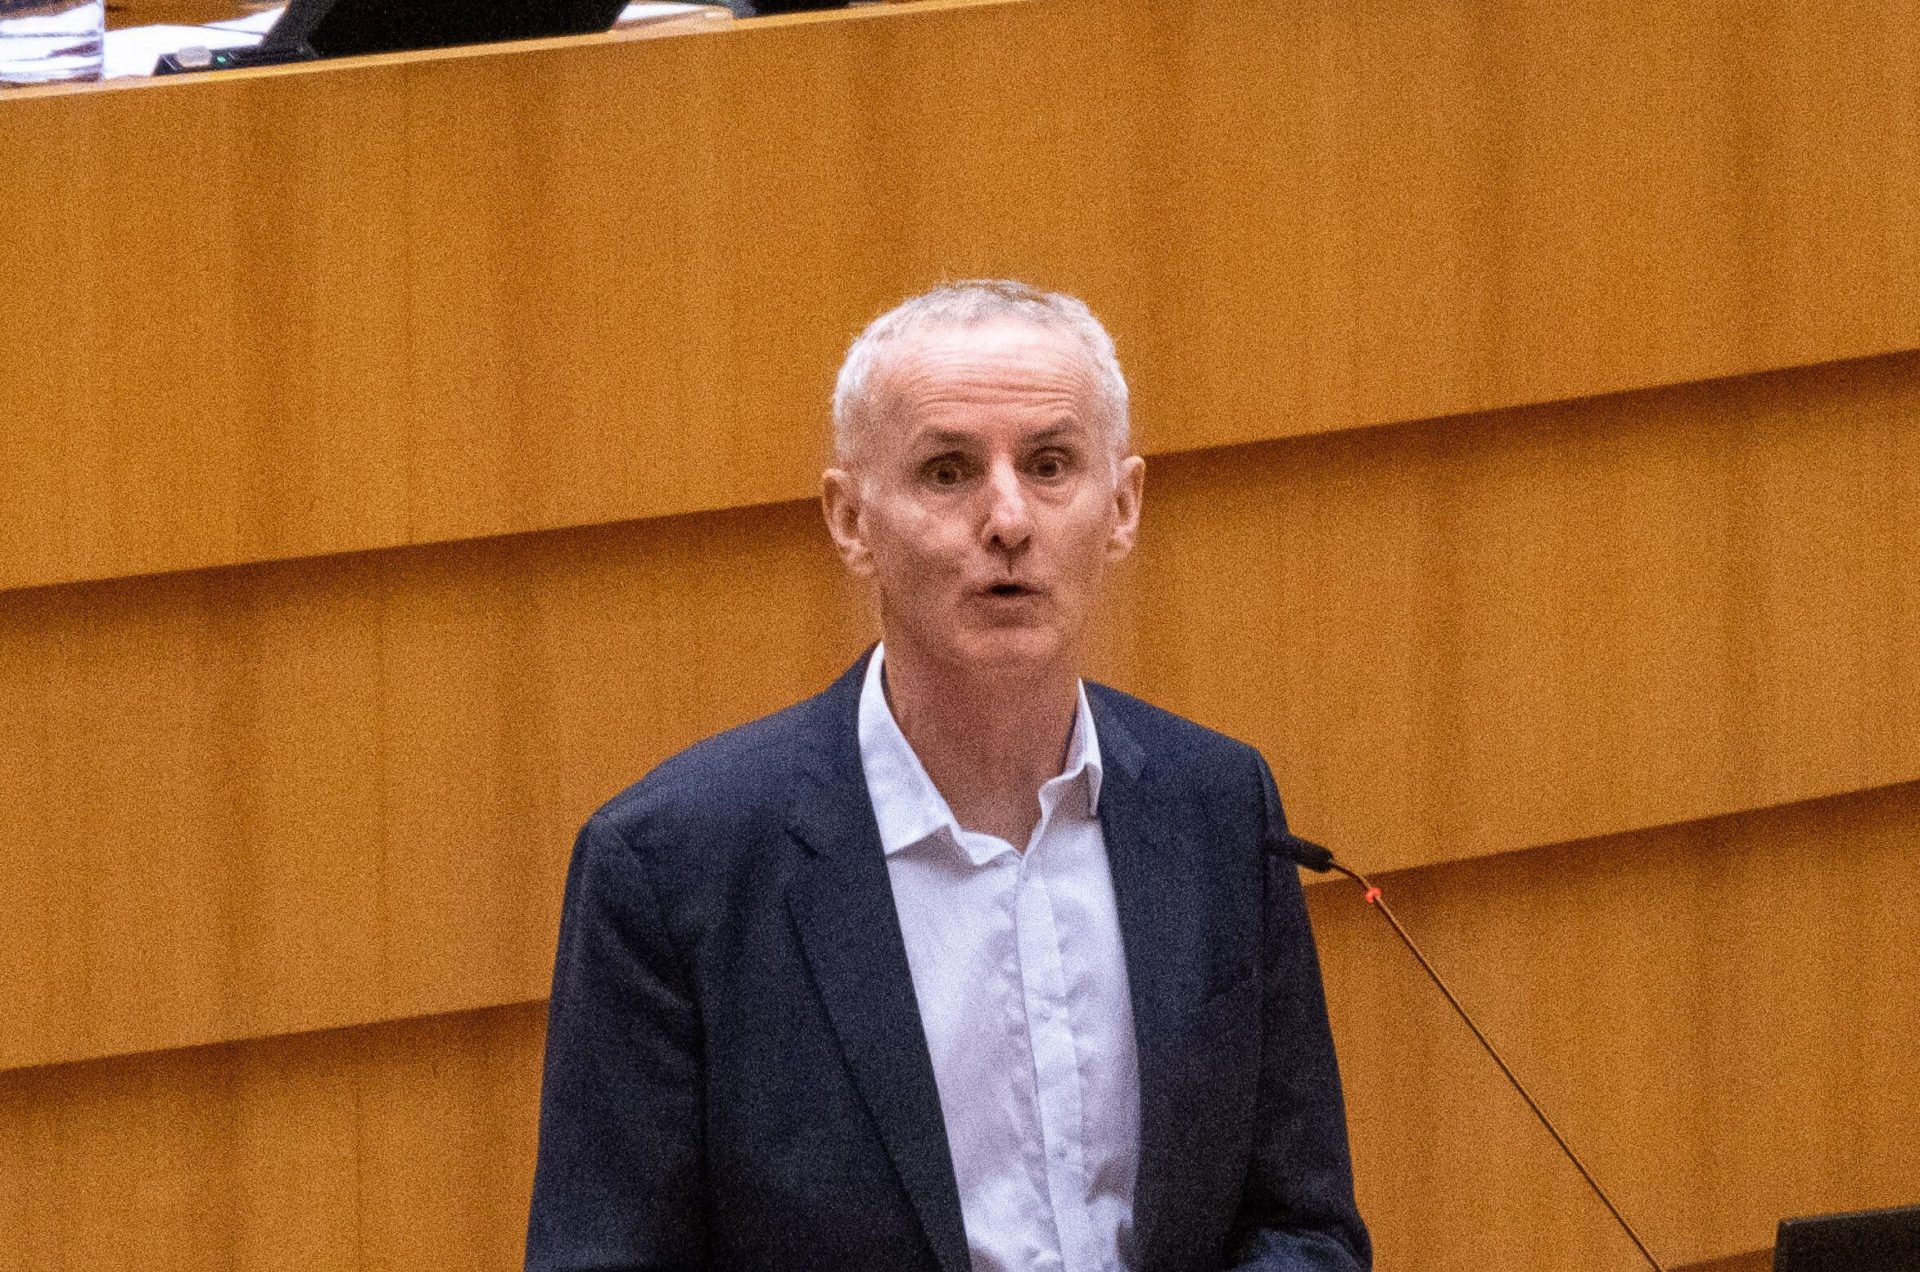 Green Party MEP Ciarán Cuffe at a plenary session of the European Parliament in Brussels, 11-3-21.